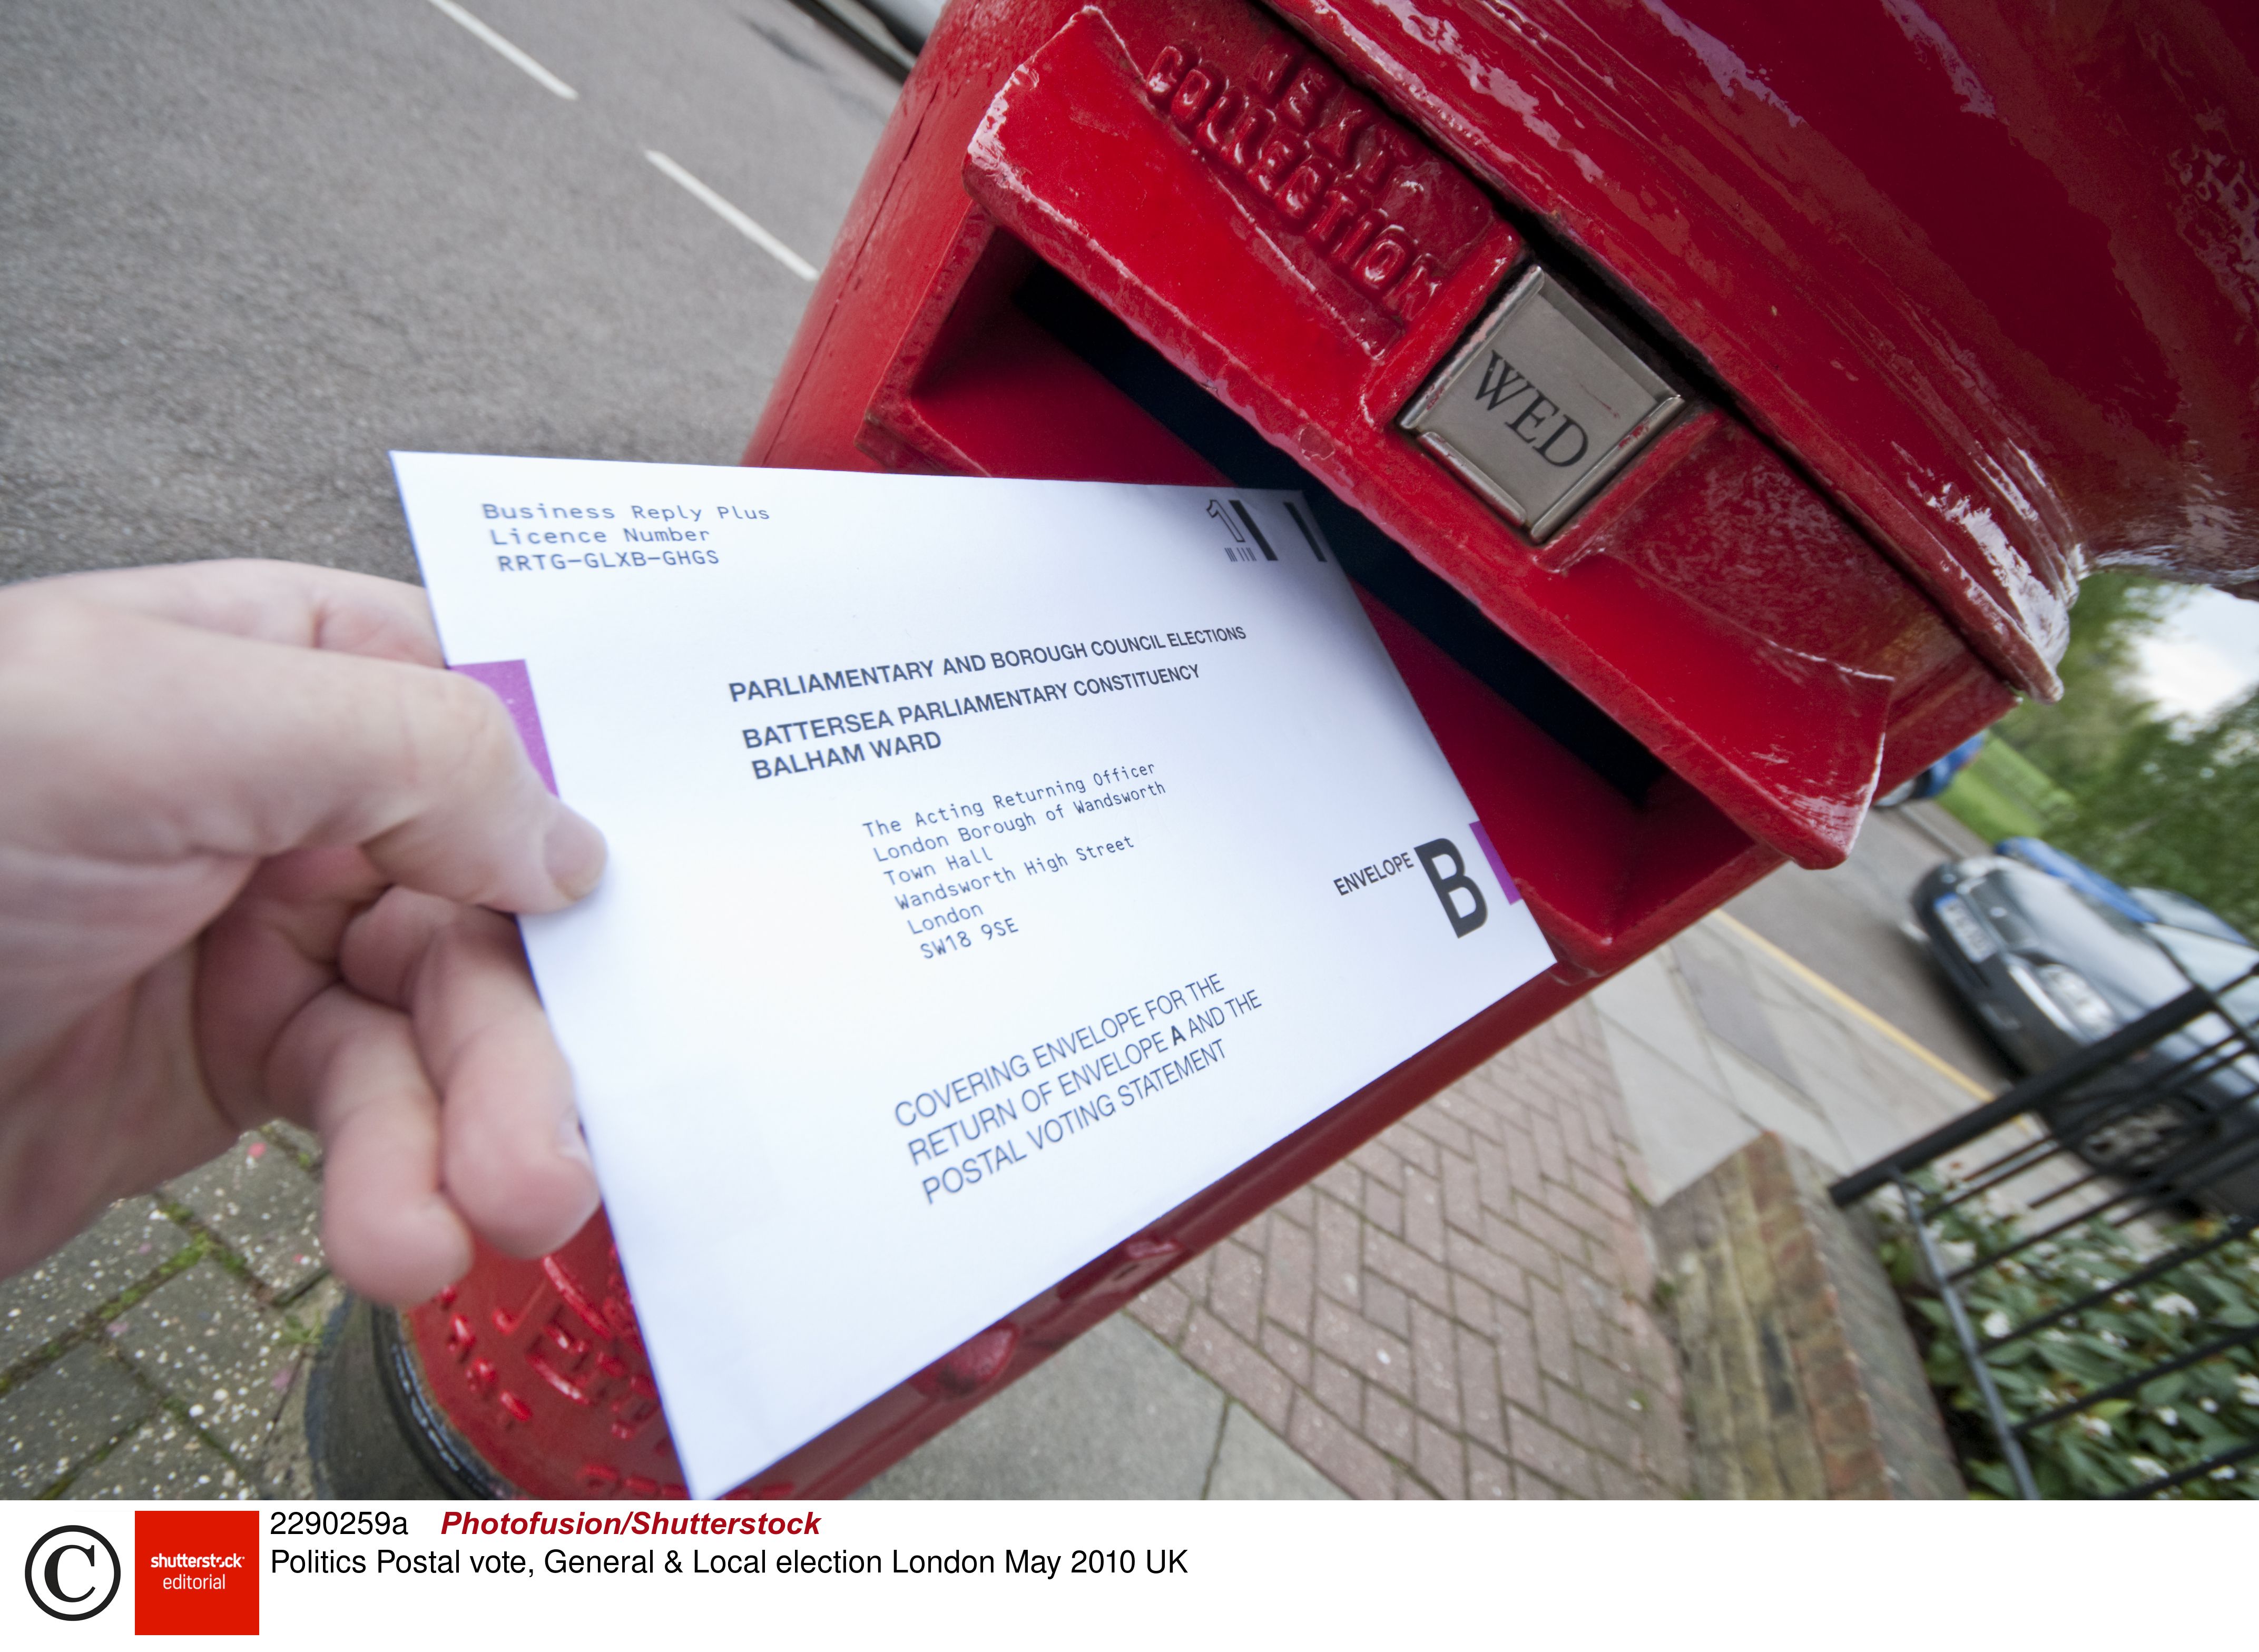 How Kingston Students can register for the postal vote